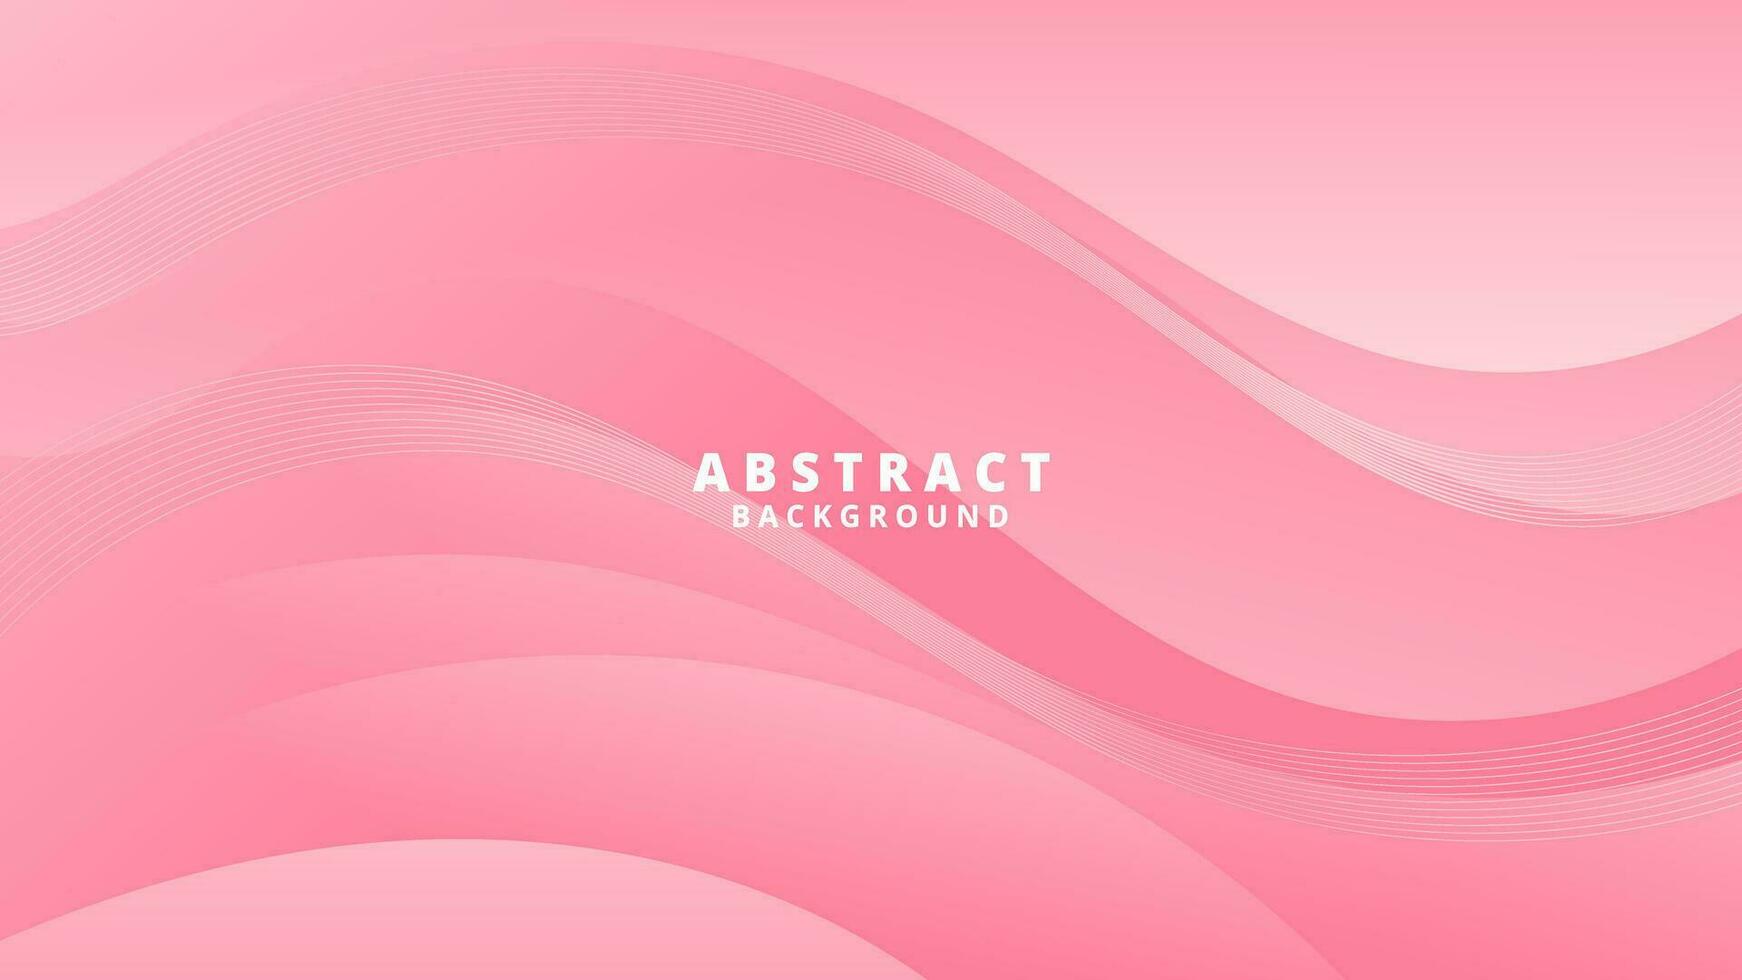 Abstract Gradient  Pink white  liquid background. Modern  background design. Dynamic Waves. Fluid shapes composition.  Fit for website, banners, brochure, posters vector